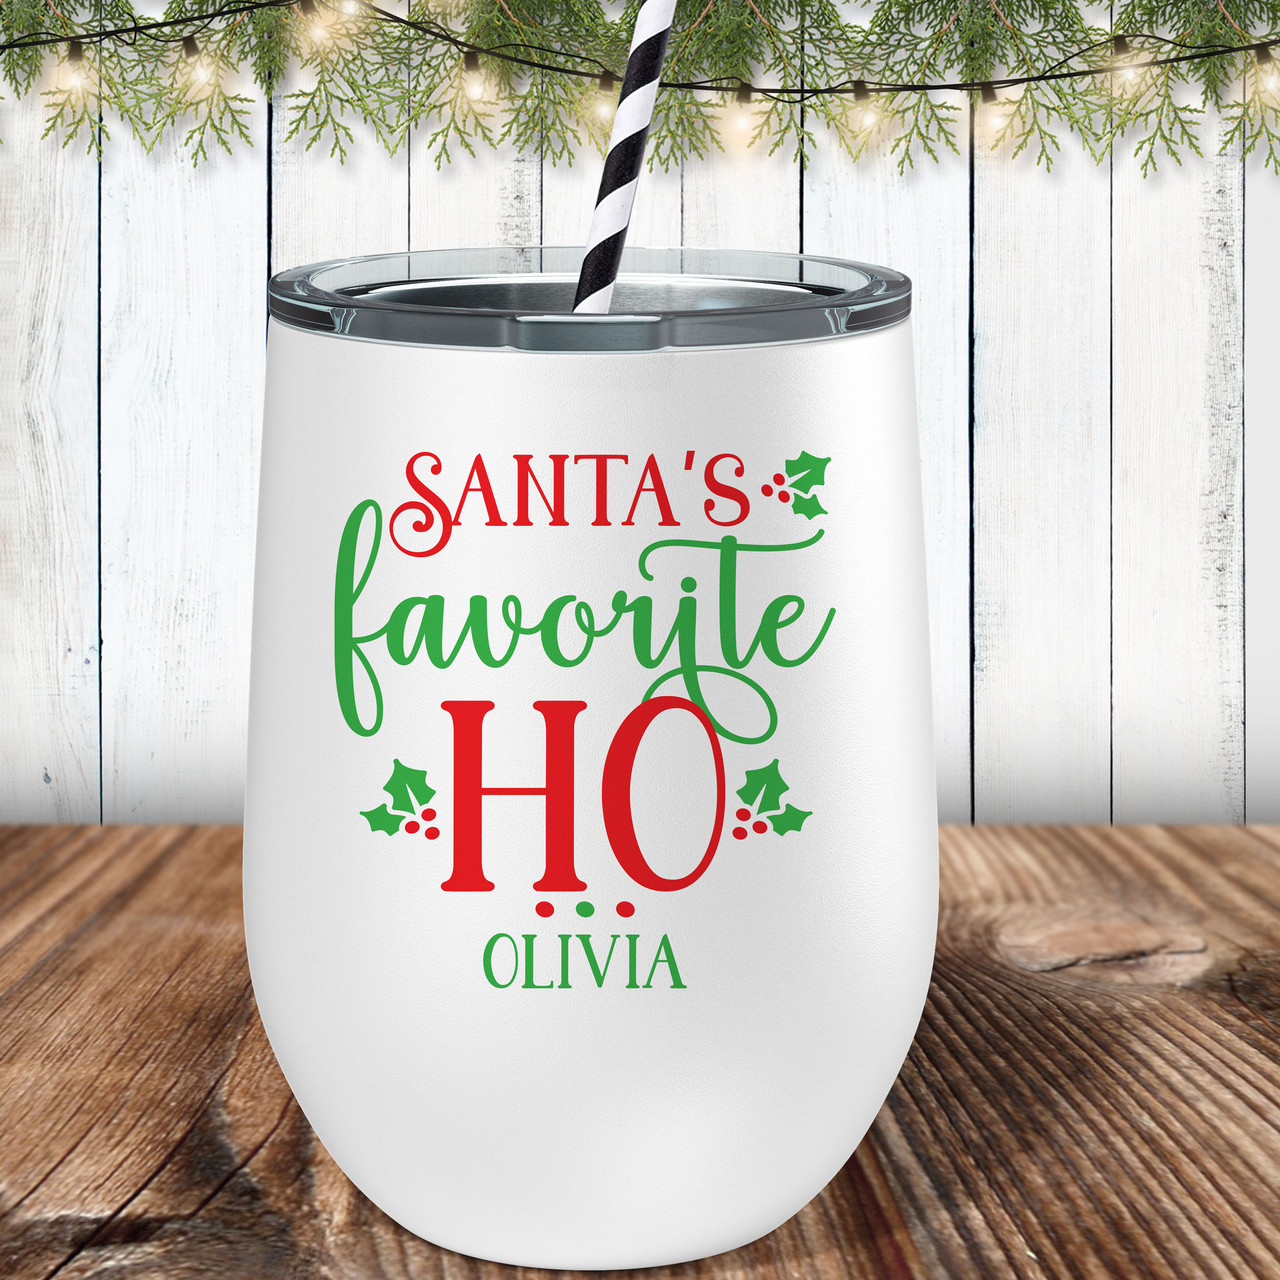 https://cdn11.bigcommerce.com/s-5grzuu6/images/stencil/1280x1280/products/4776/56283/Santas-Favorite-Ho-Personalized_Christmas-Wine-Tumbler_Cup__05824.1699049288.jpg?c=2